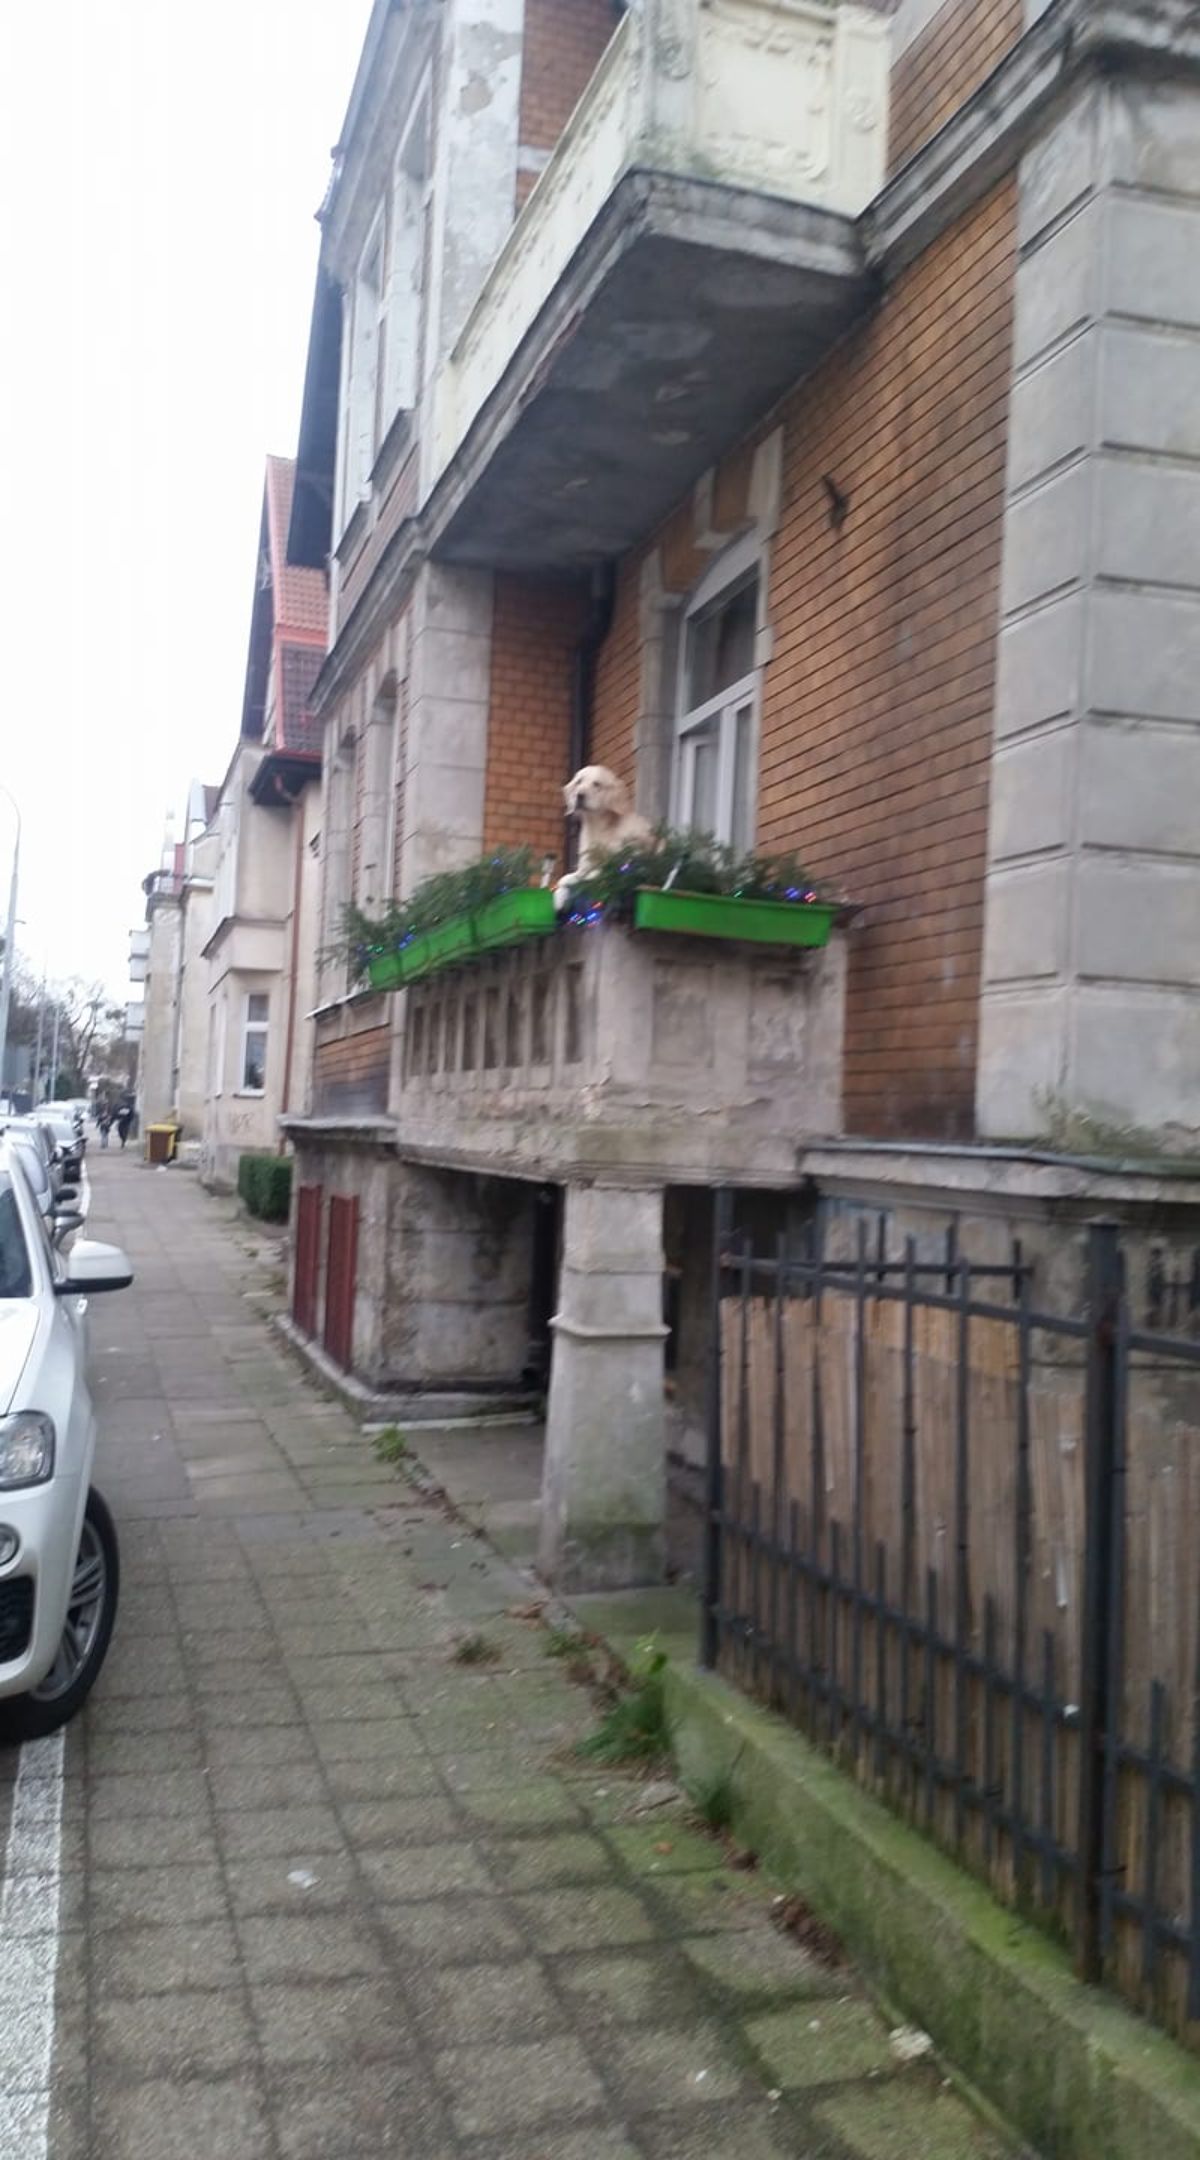 golden retriever hanging over a balcony with green plant pots